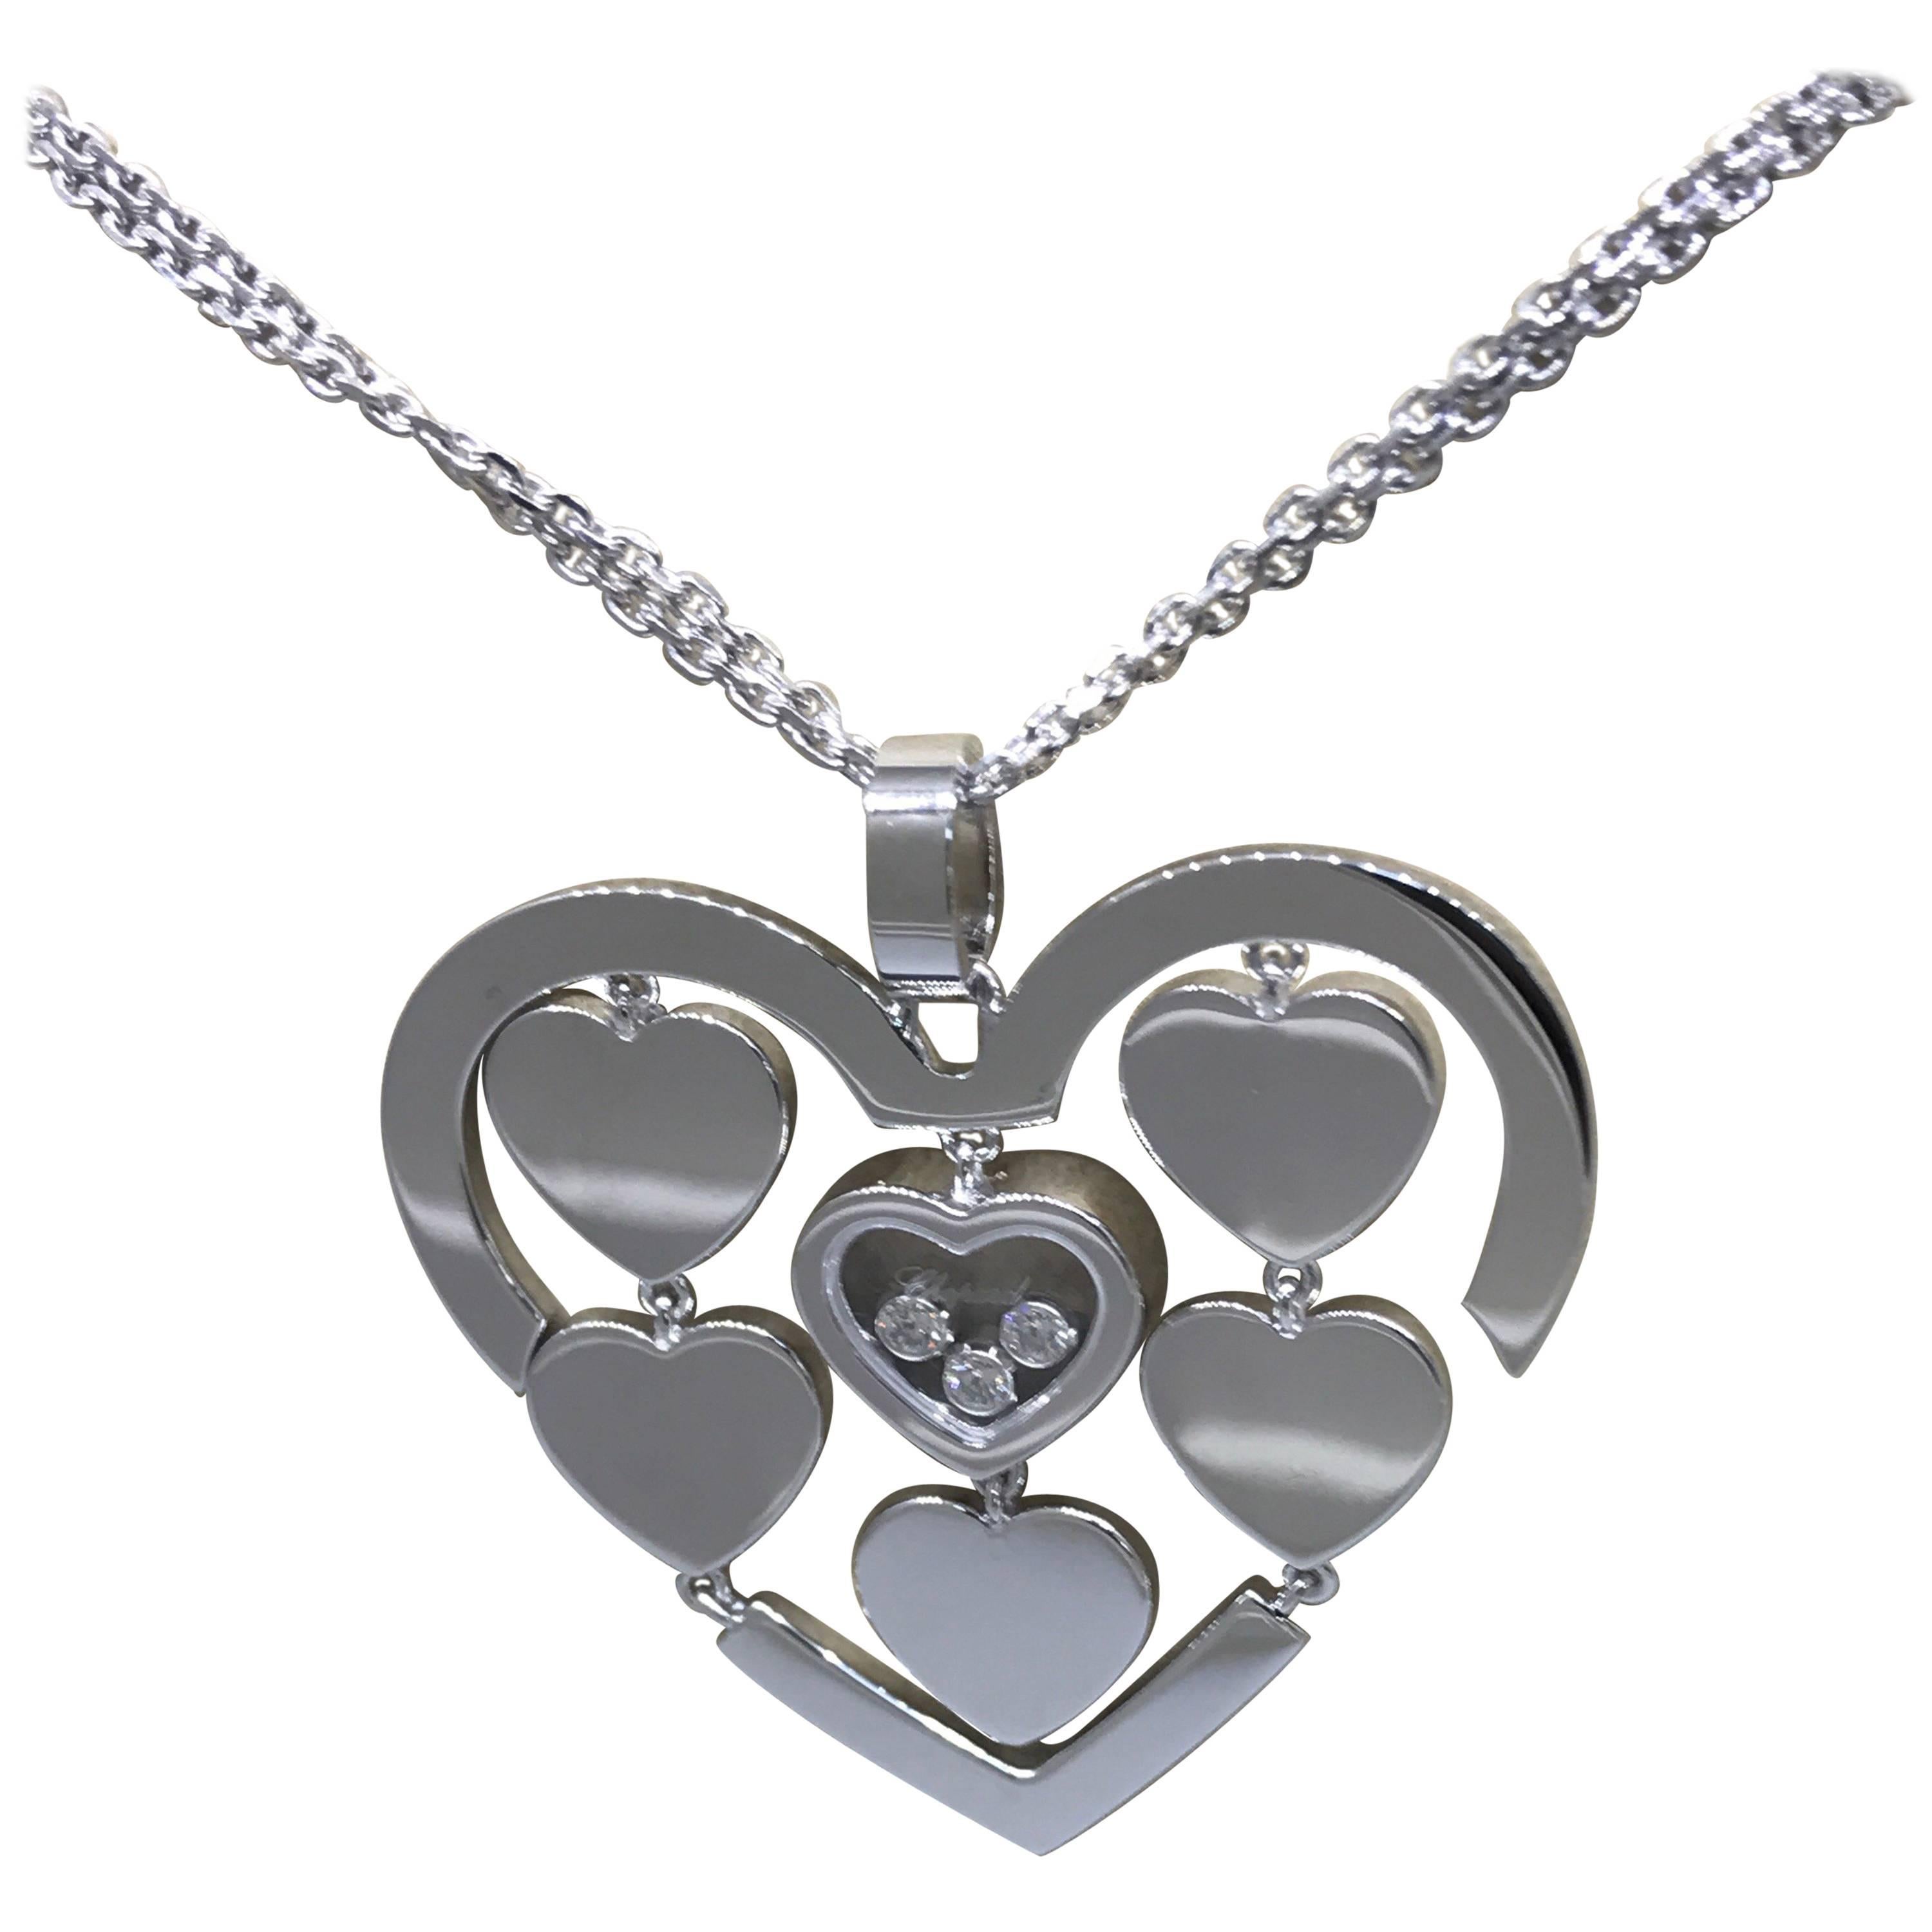 Chopard Amore Hearts 18 Karat Gold and Diamond Pendant Necklace 79/7220-1001 For Sale